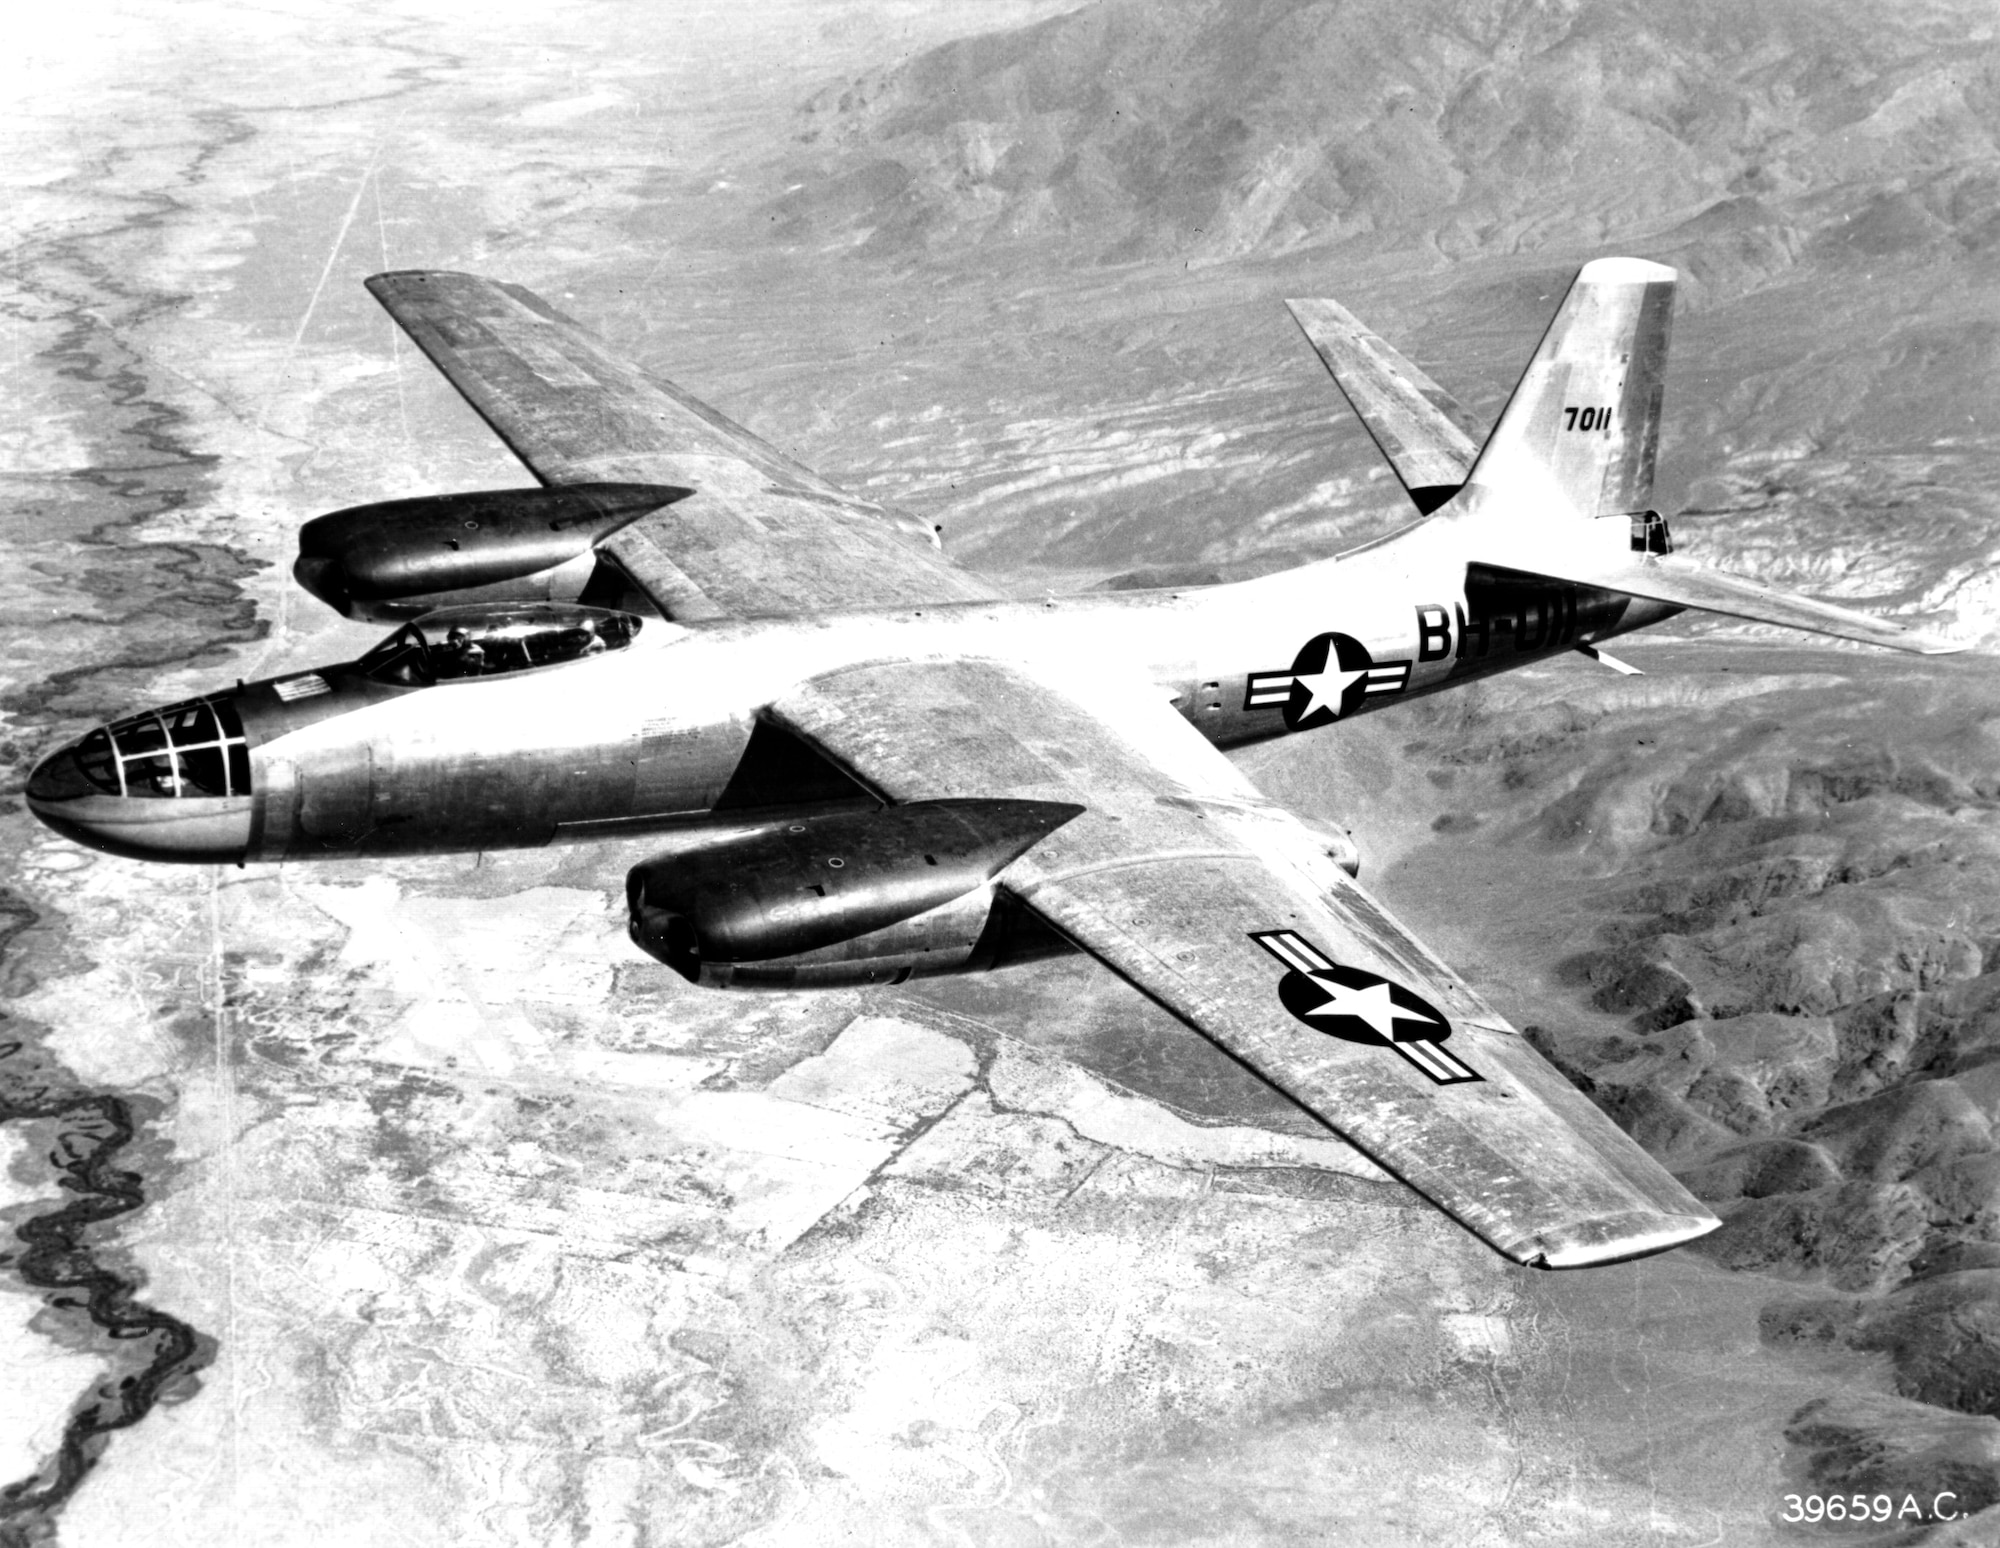 The North American B-45A Tornado shown during an early test flight from Muroc Dry Lake in California. B-45A model can be distinguished by the two-place cockpit under one single Plexiglas canopy.